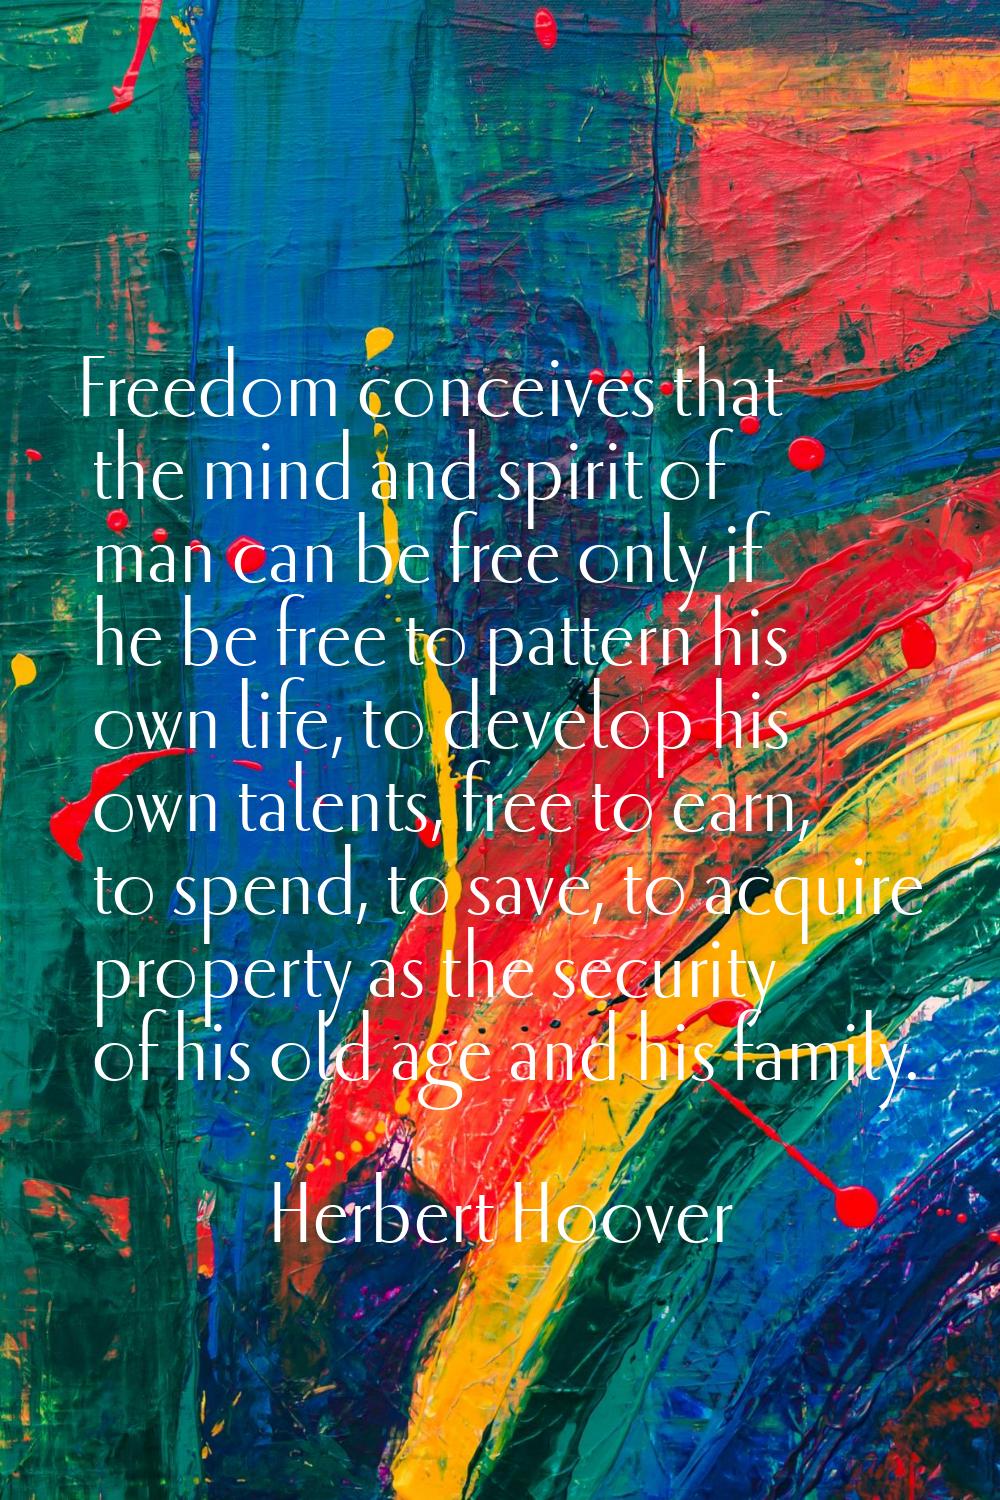 Freedom conceives that the mind and spirit of man can be free only if he be free to pattern his own